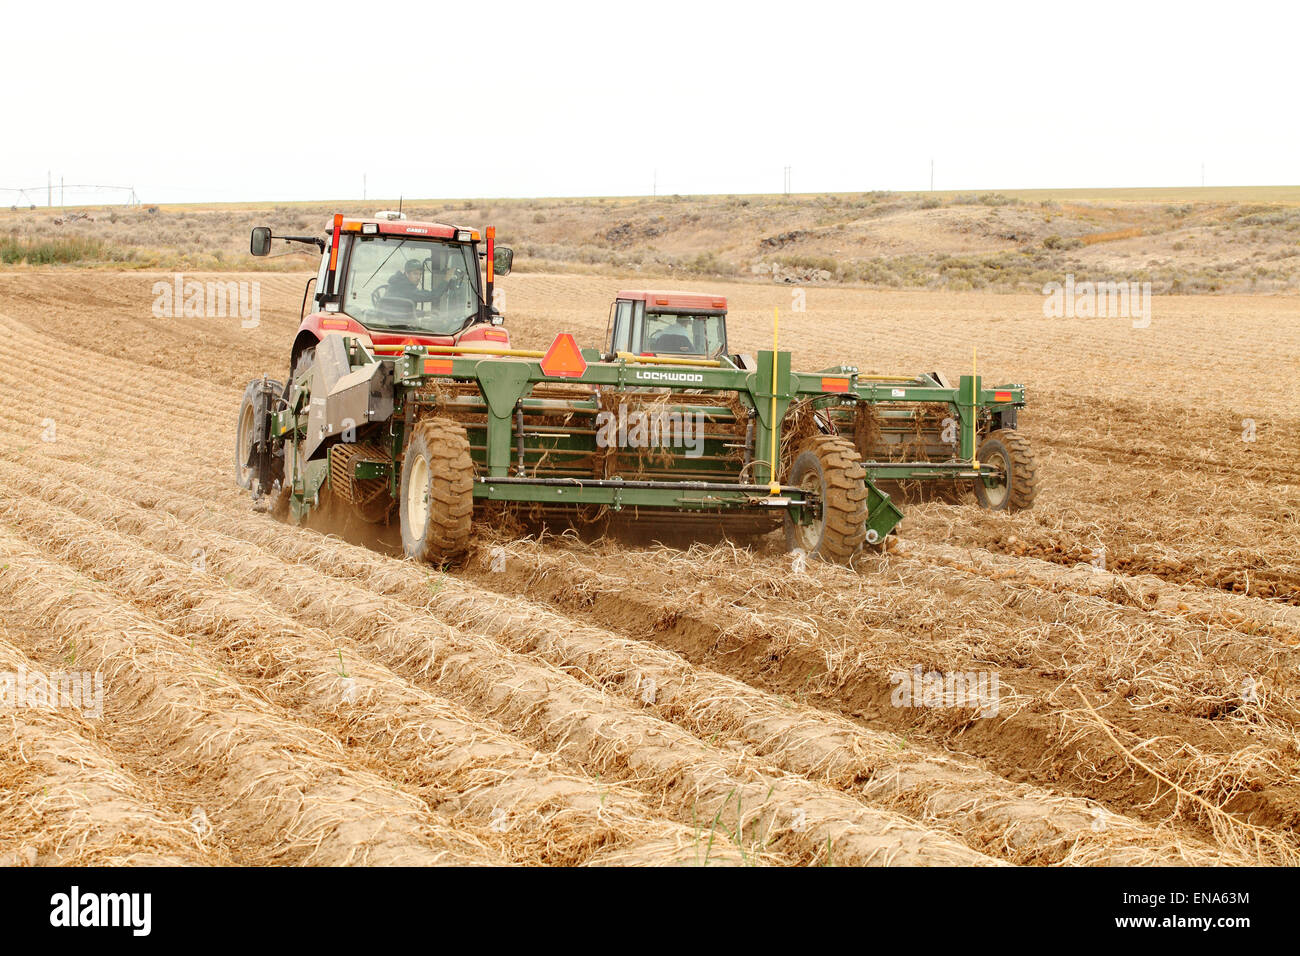 Farmers and field hands use wind rowing machinery in the field harvesting famous Idaho potatoes. Stock Photo